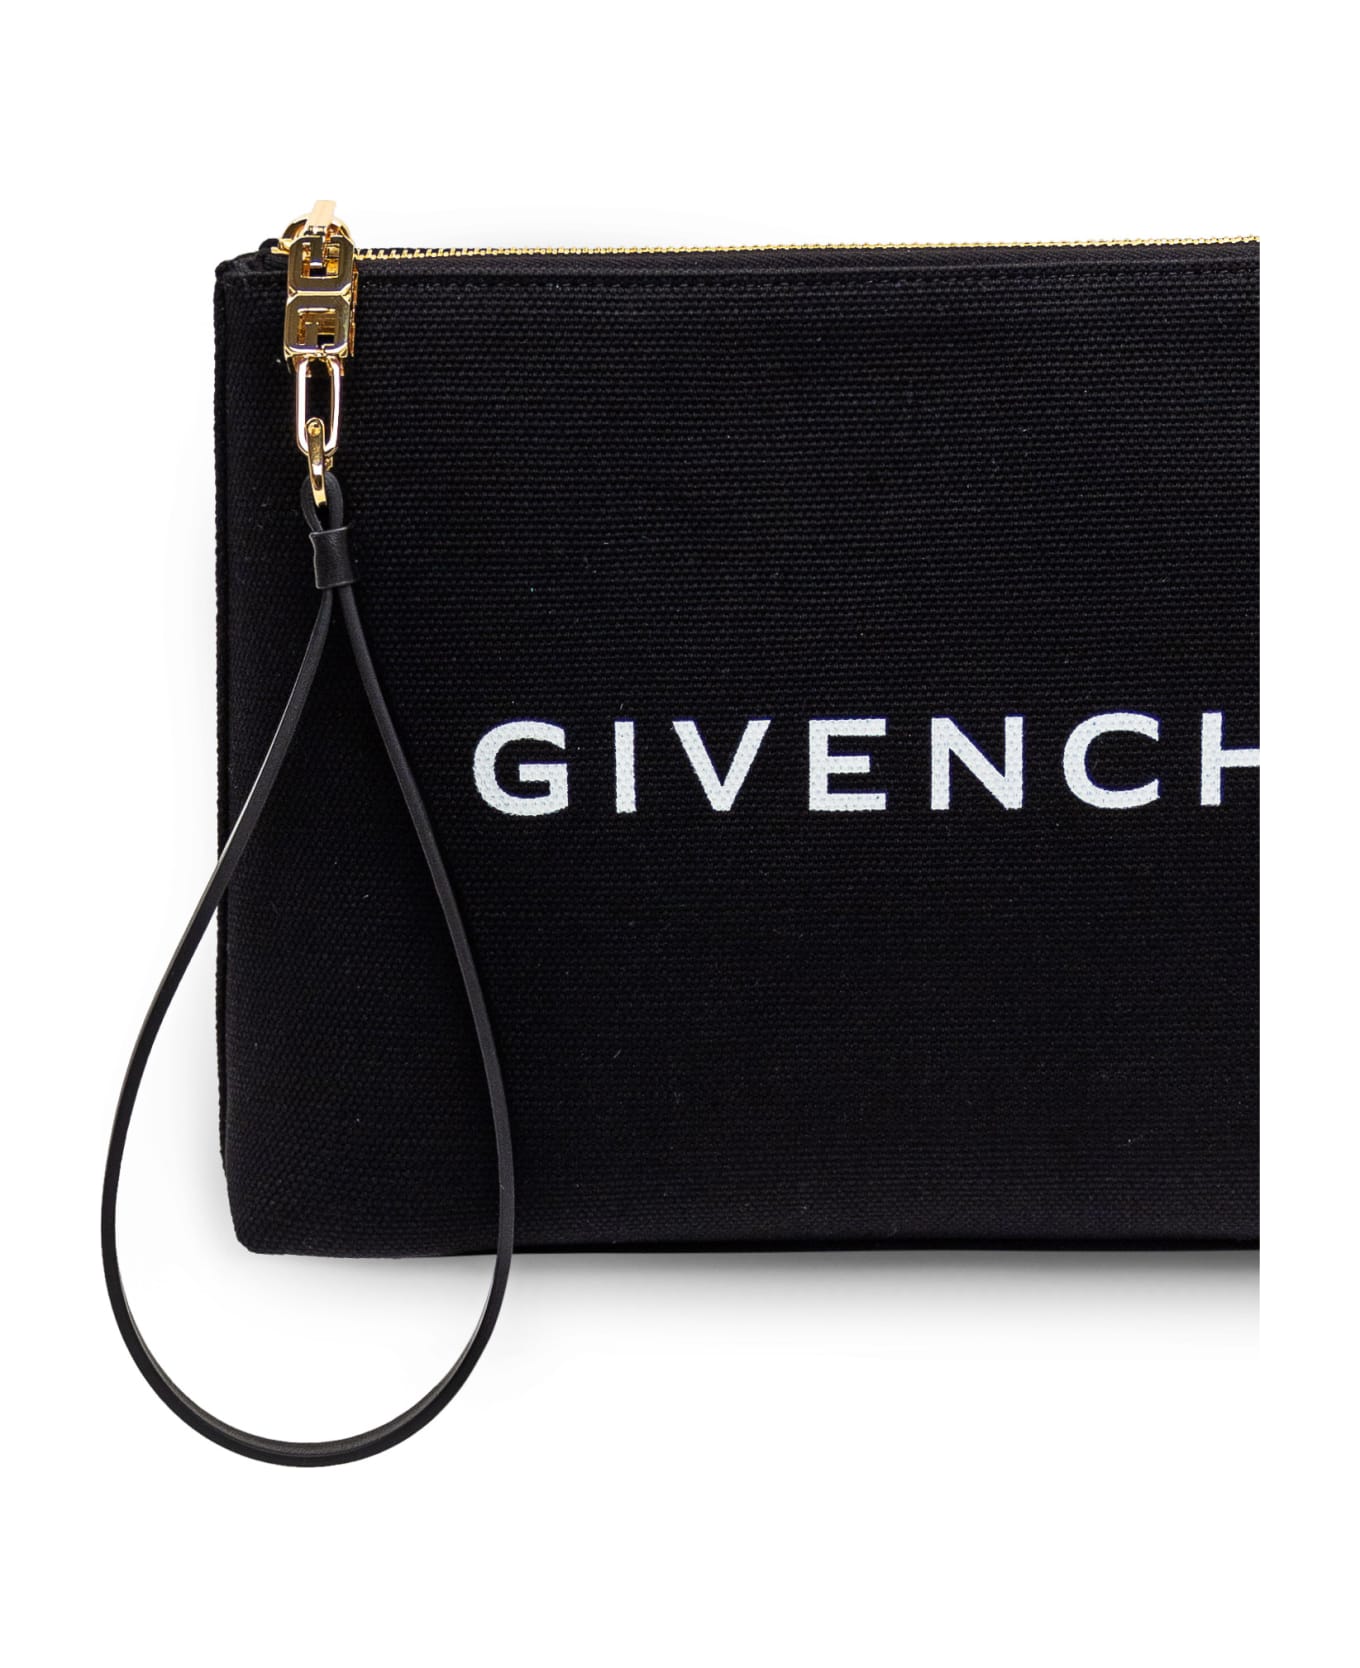 Givenchy Travel Pouch Clutch - Black クラッチバッグ